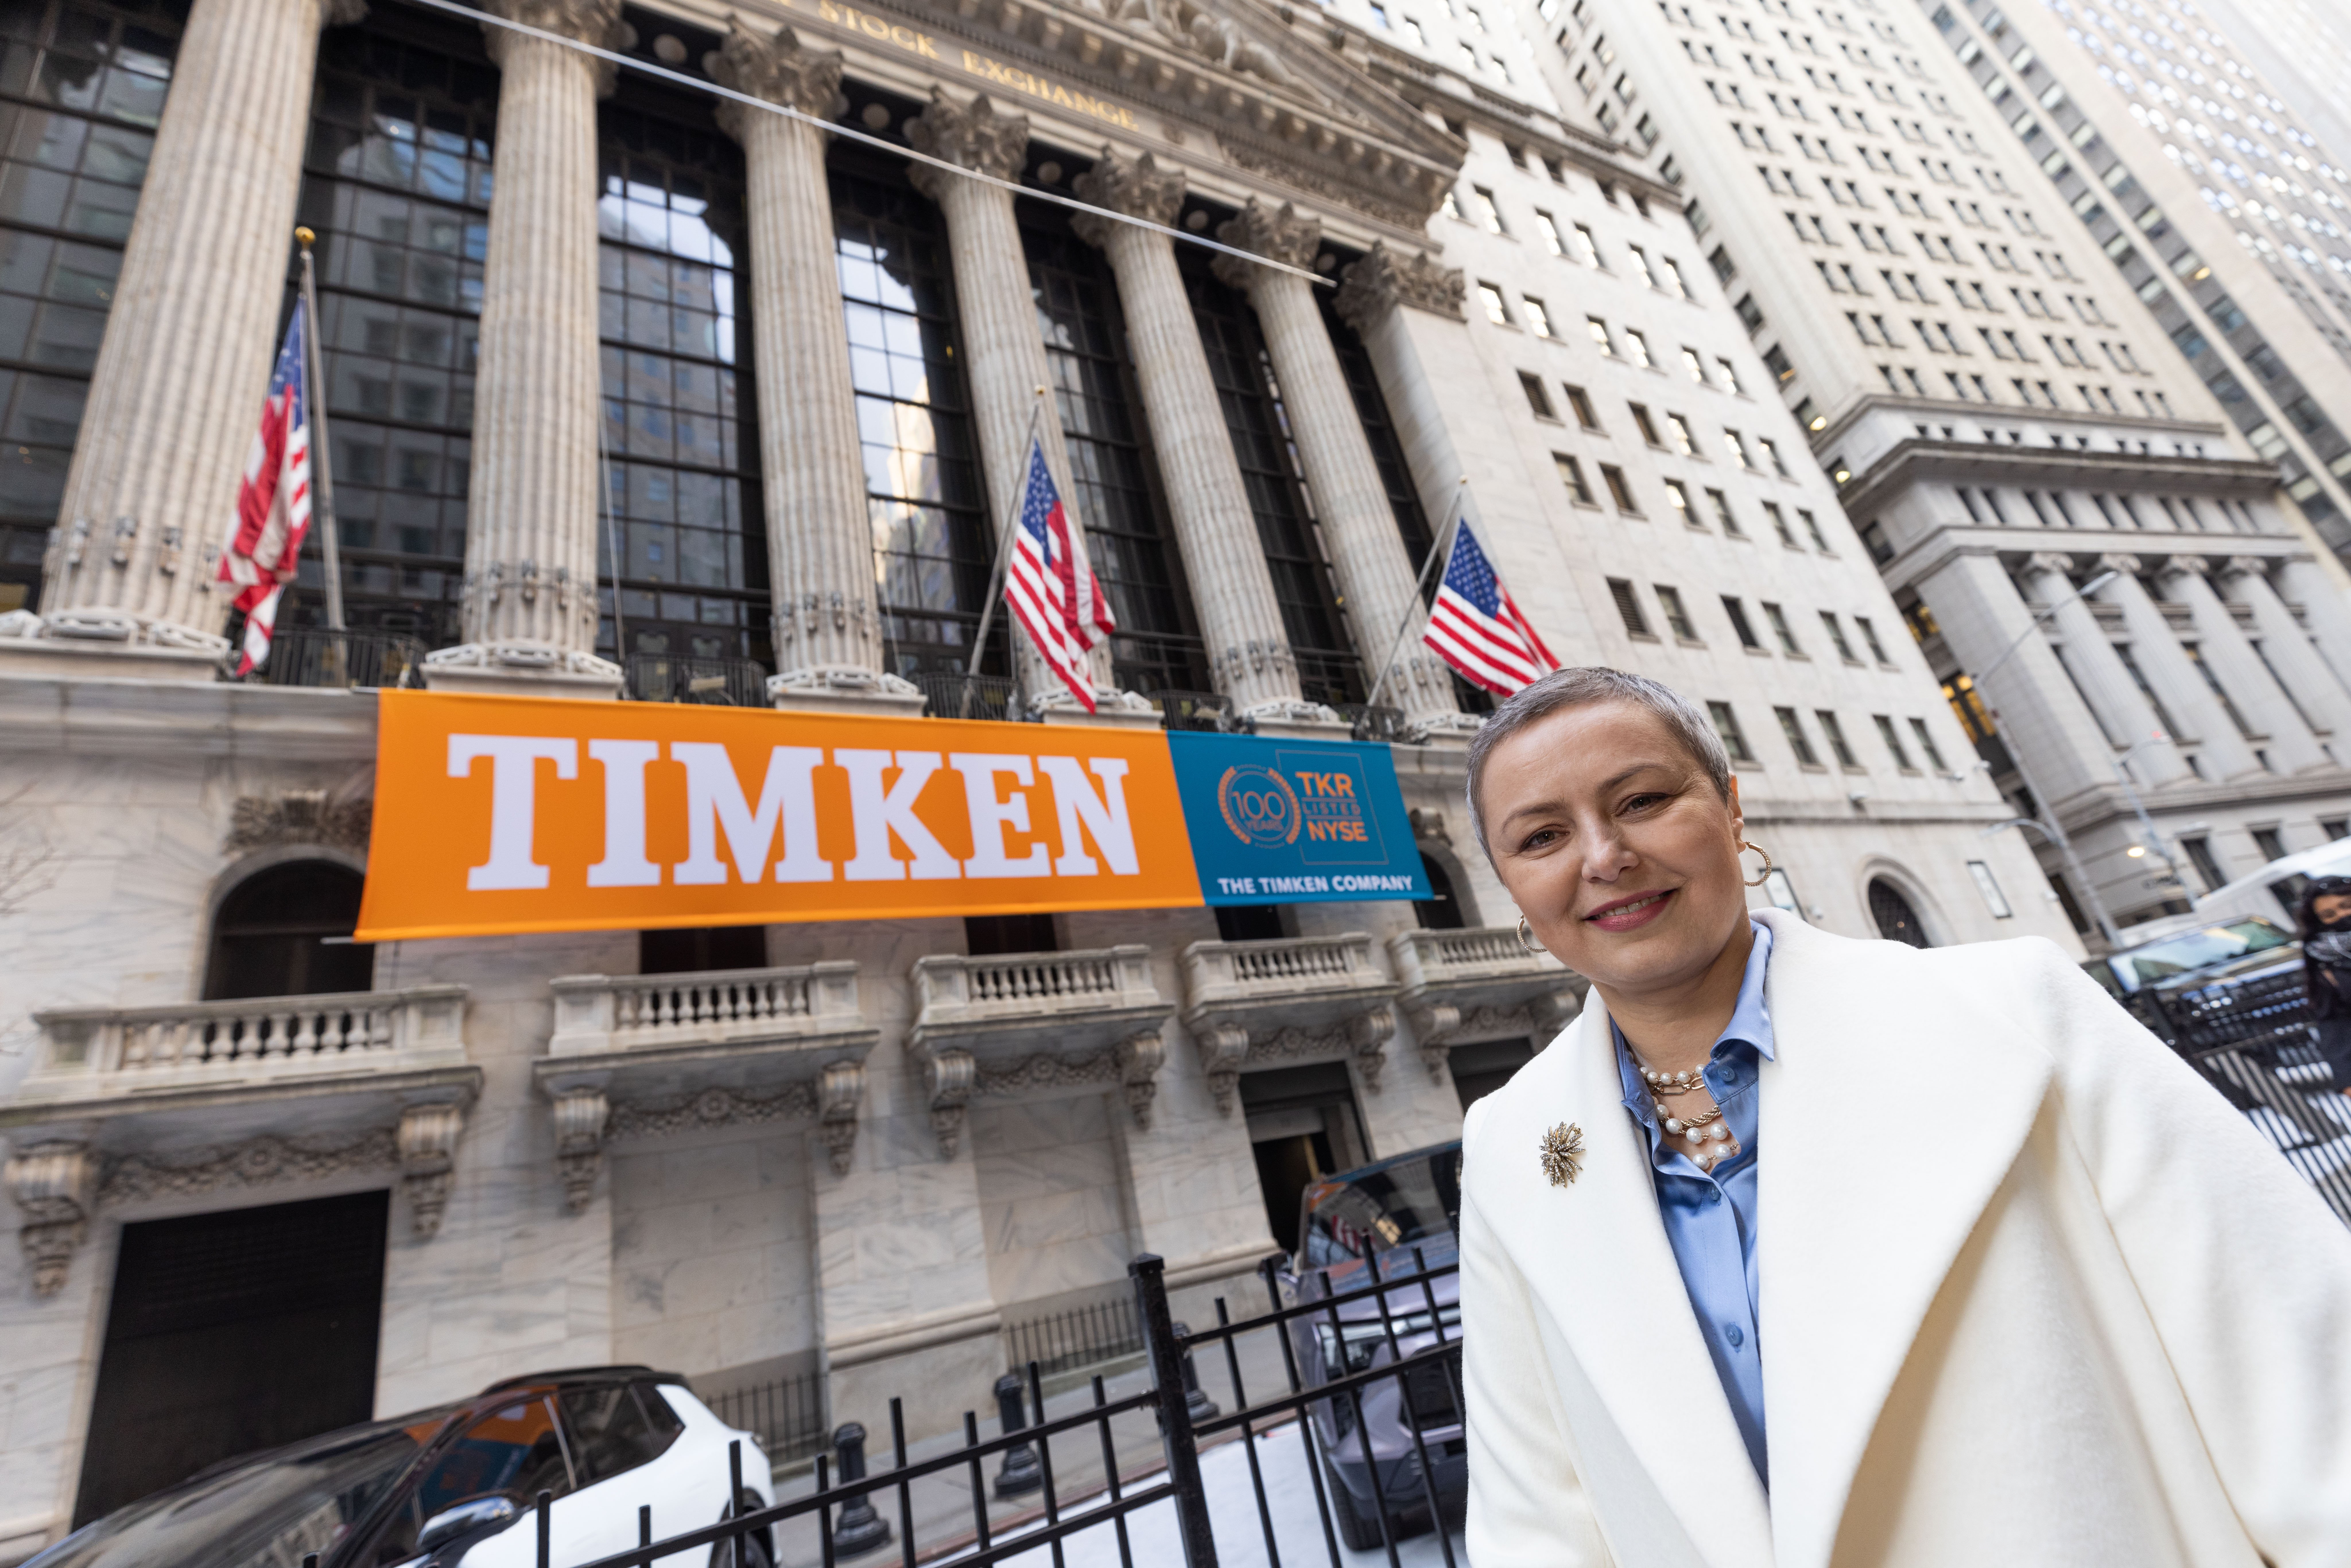 Natasha Pollock, Vice President and Chief Human Resources Officer at The Timken Company, in front of Timken's office building